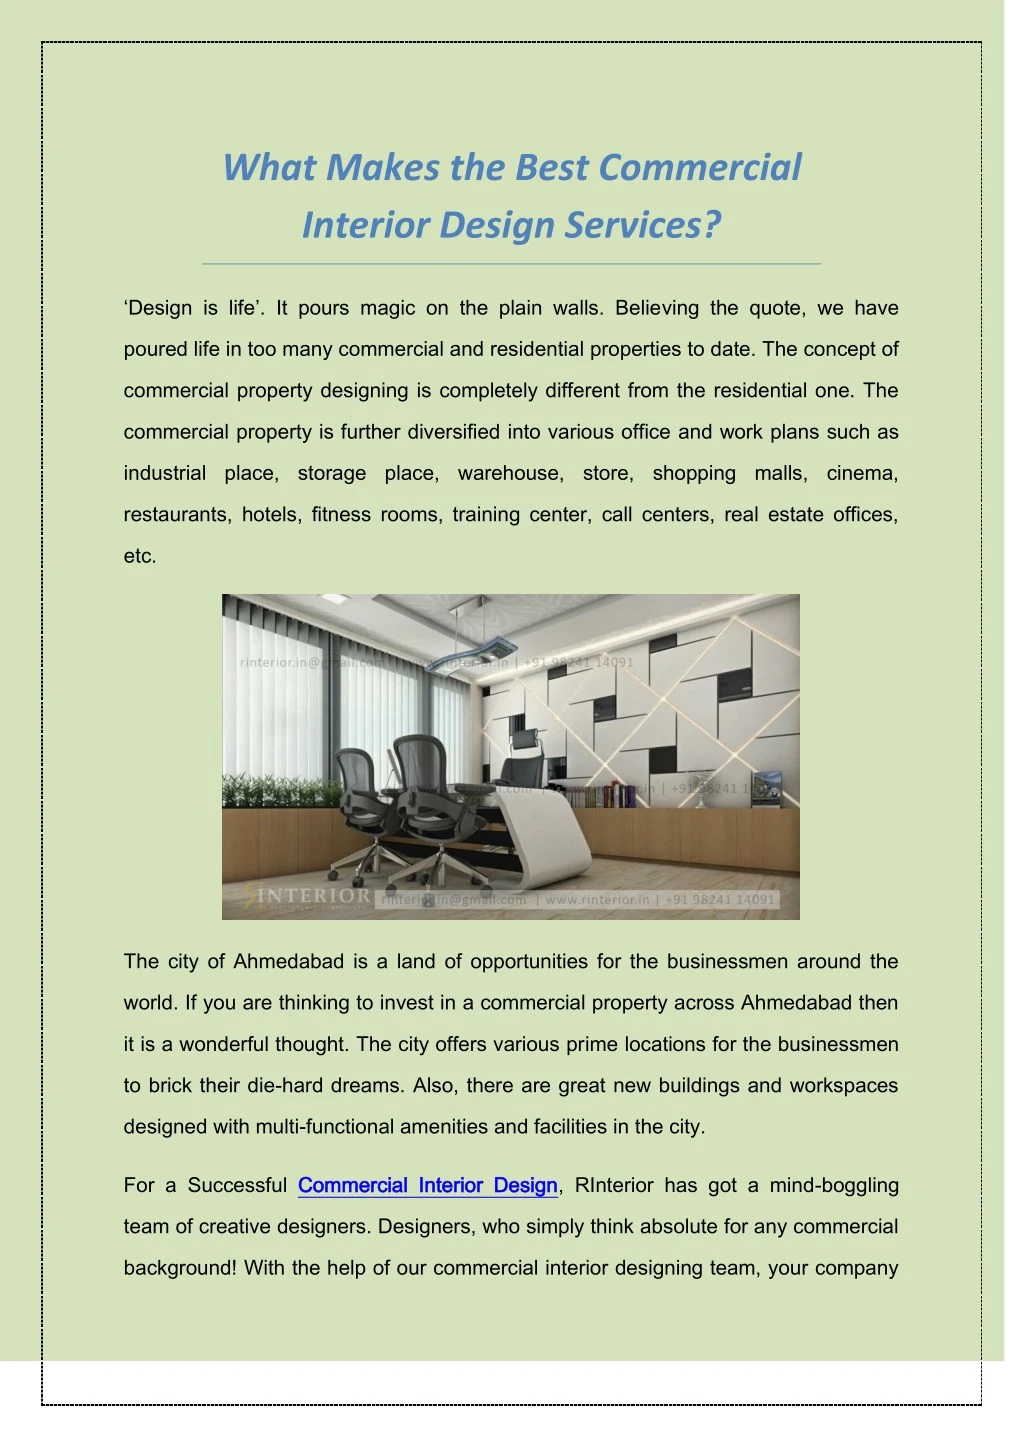 what makes the best commercial interior design